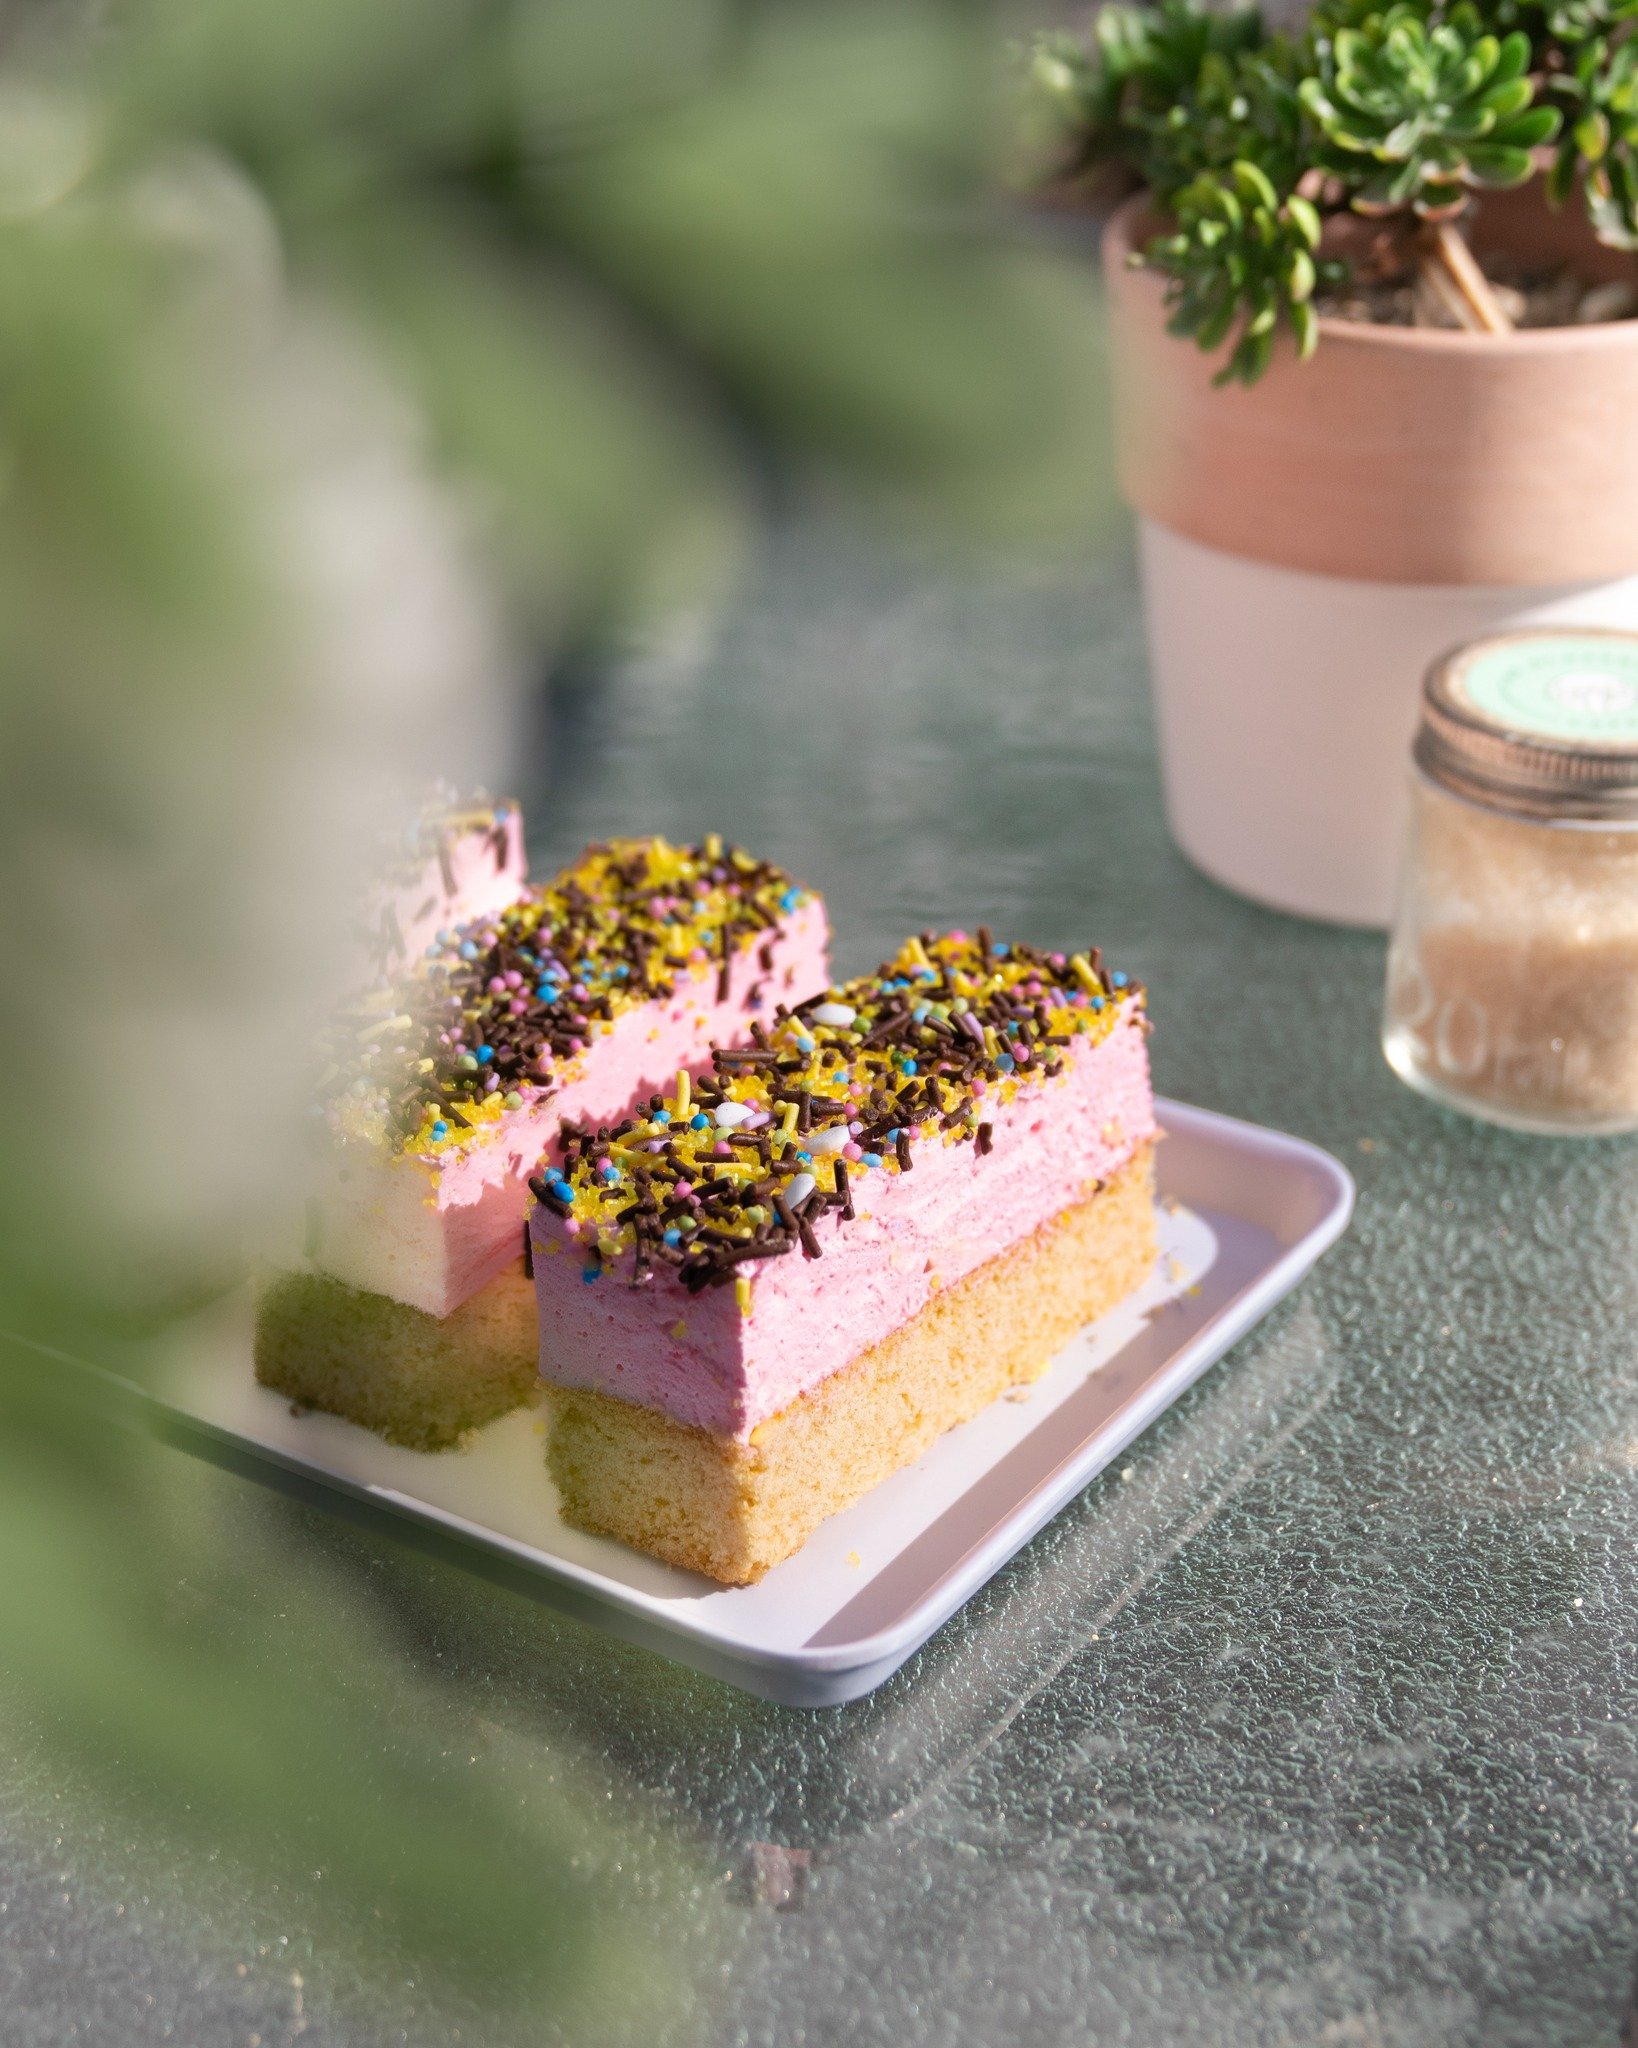 🌸 This one's for your little ones! A pink marshmallow slice that's fluffier than a cloud and cuter than a bunny 🐰 Available only during the school holidays, so don't miss out on this melt-in-your-mouth deliciousness! 😋

#KidsTreat  #marshmallows #